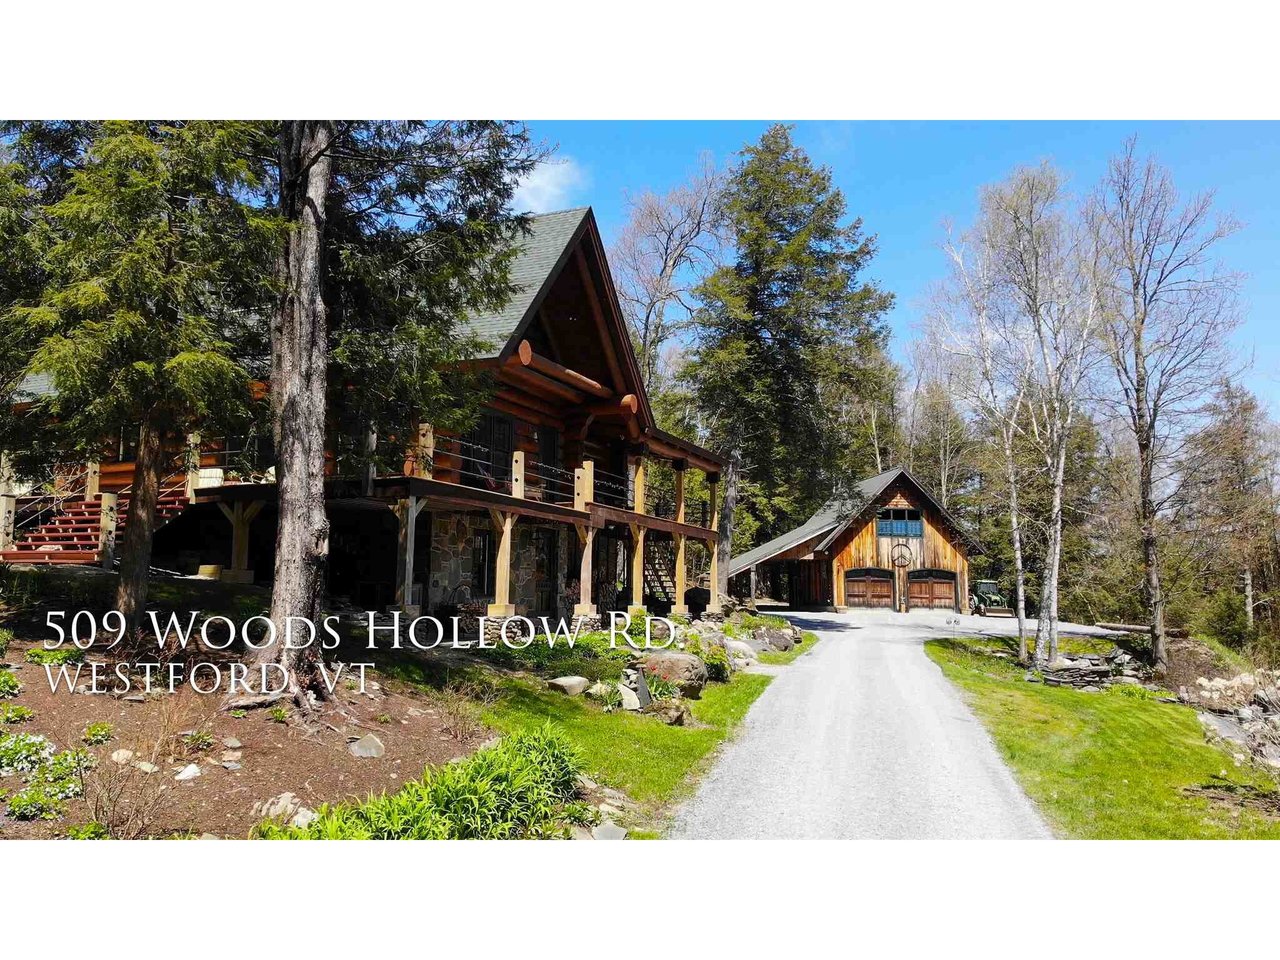 509 Woods Hollow Road